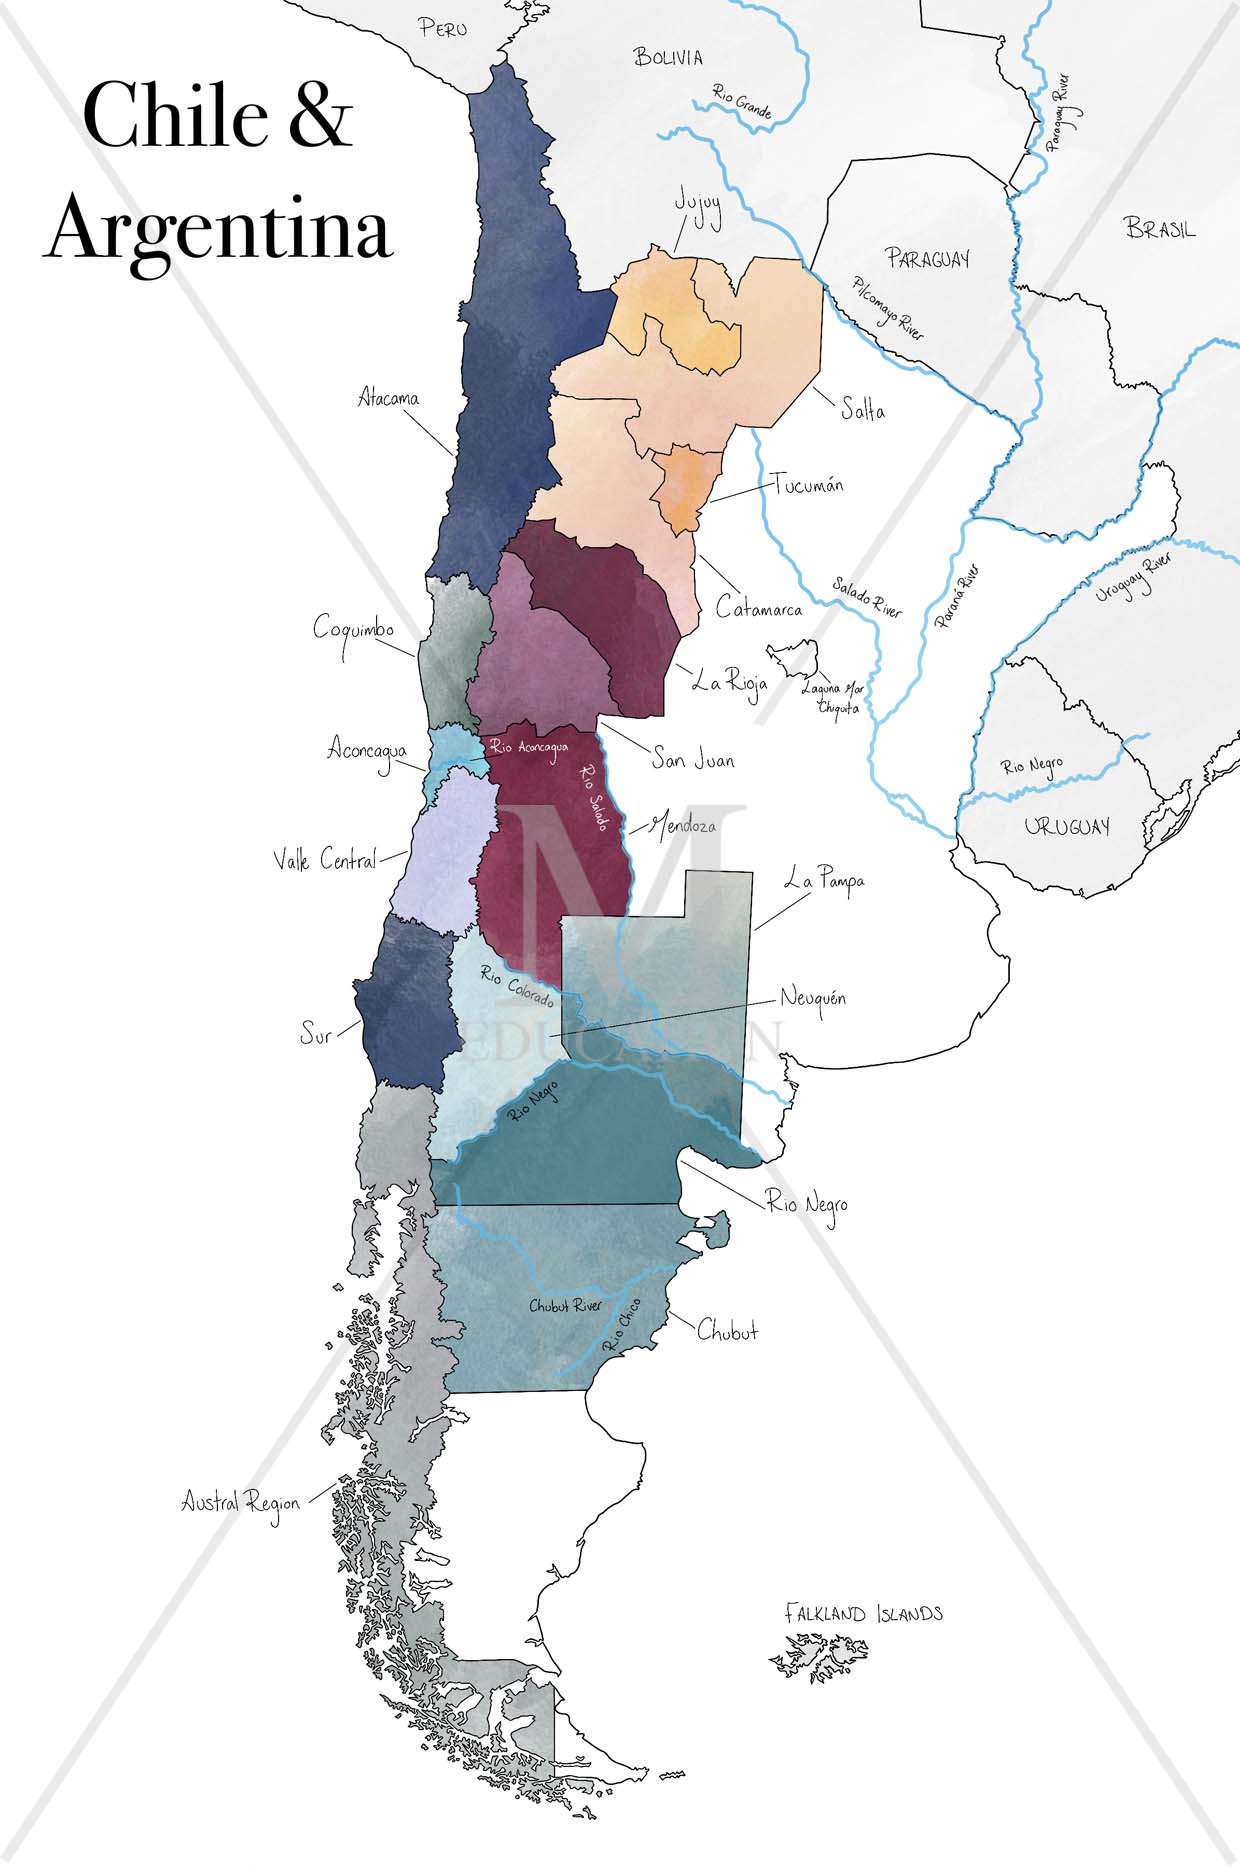 Chile & Argentina Wine Map - M.Education